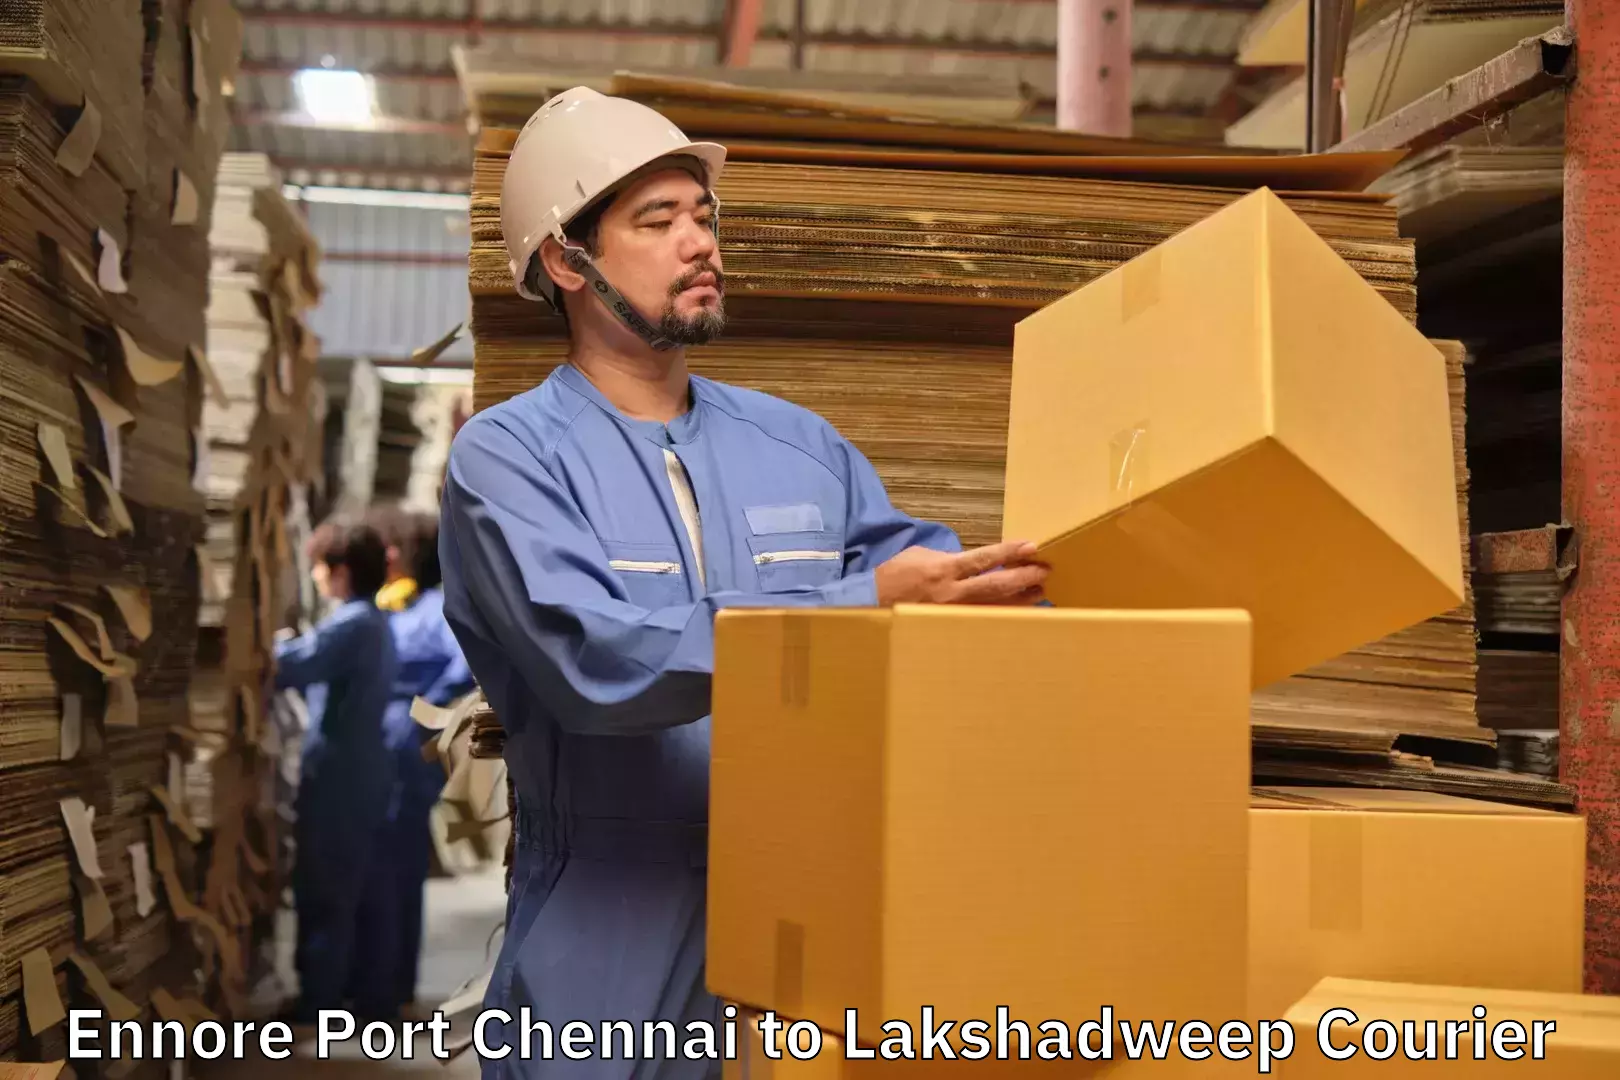 Baggage transport cost Ennore Port Chennai to Lakshadweep